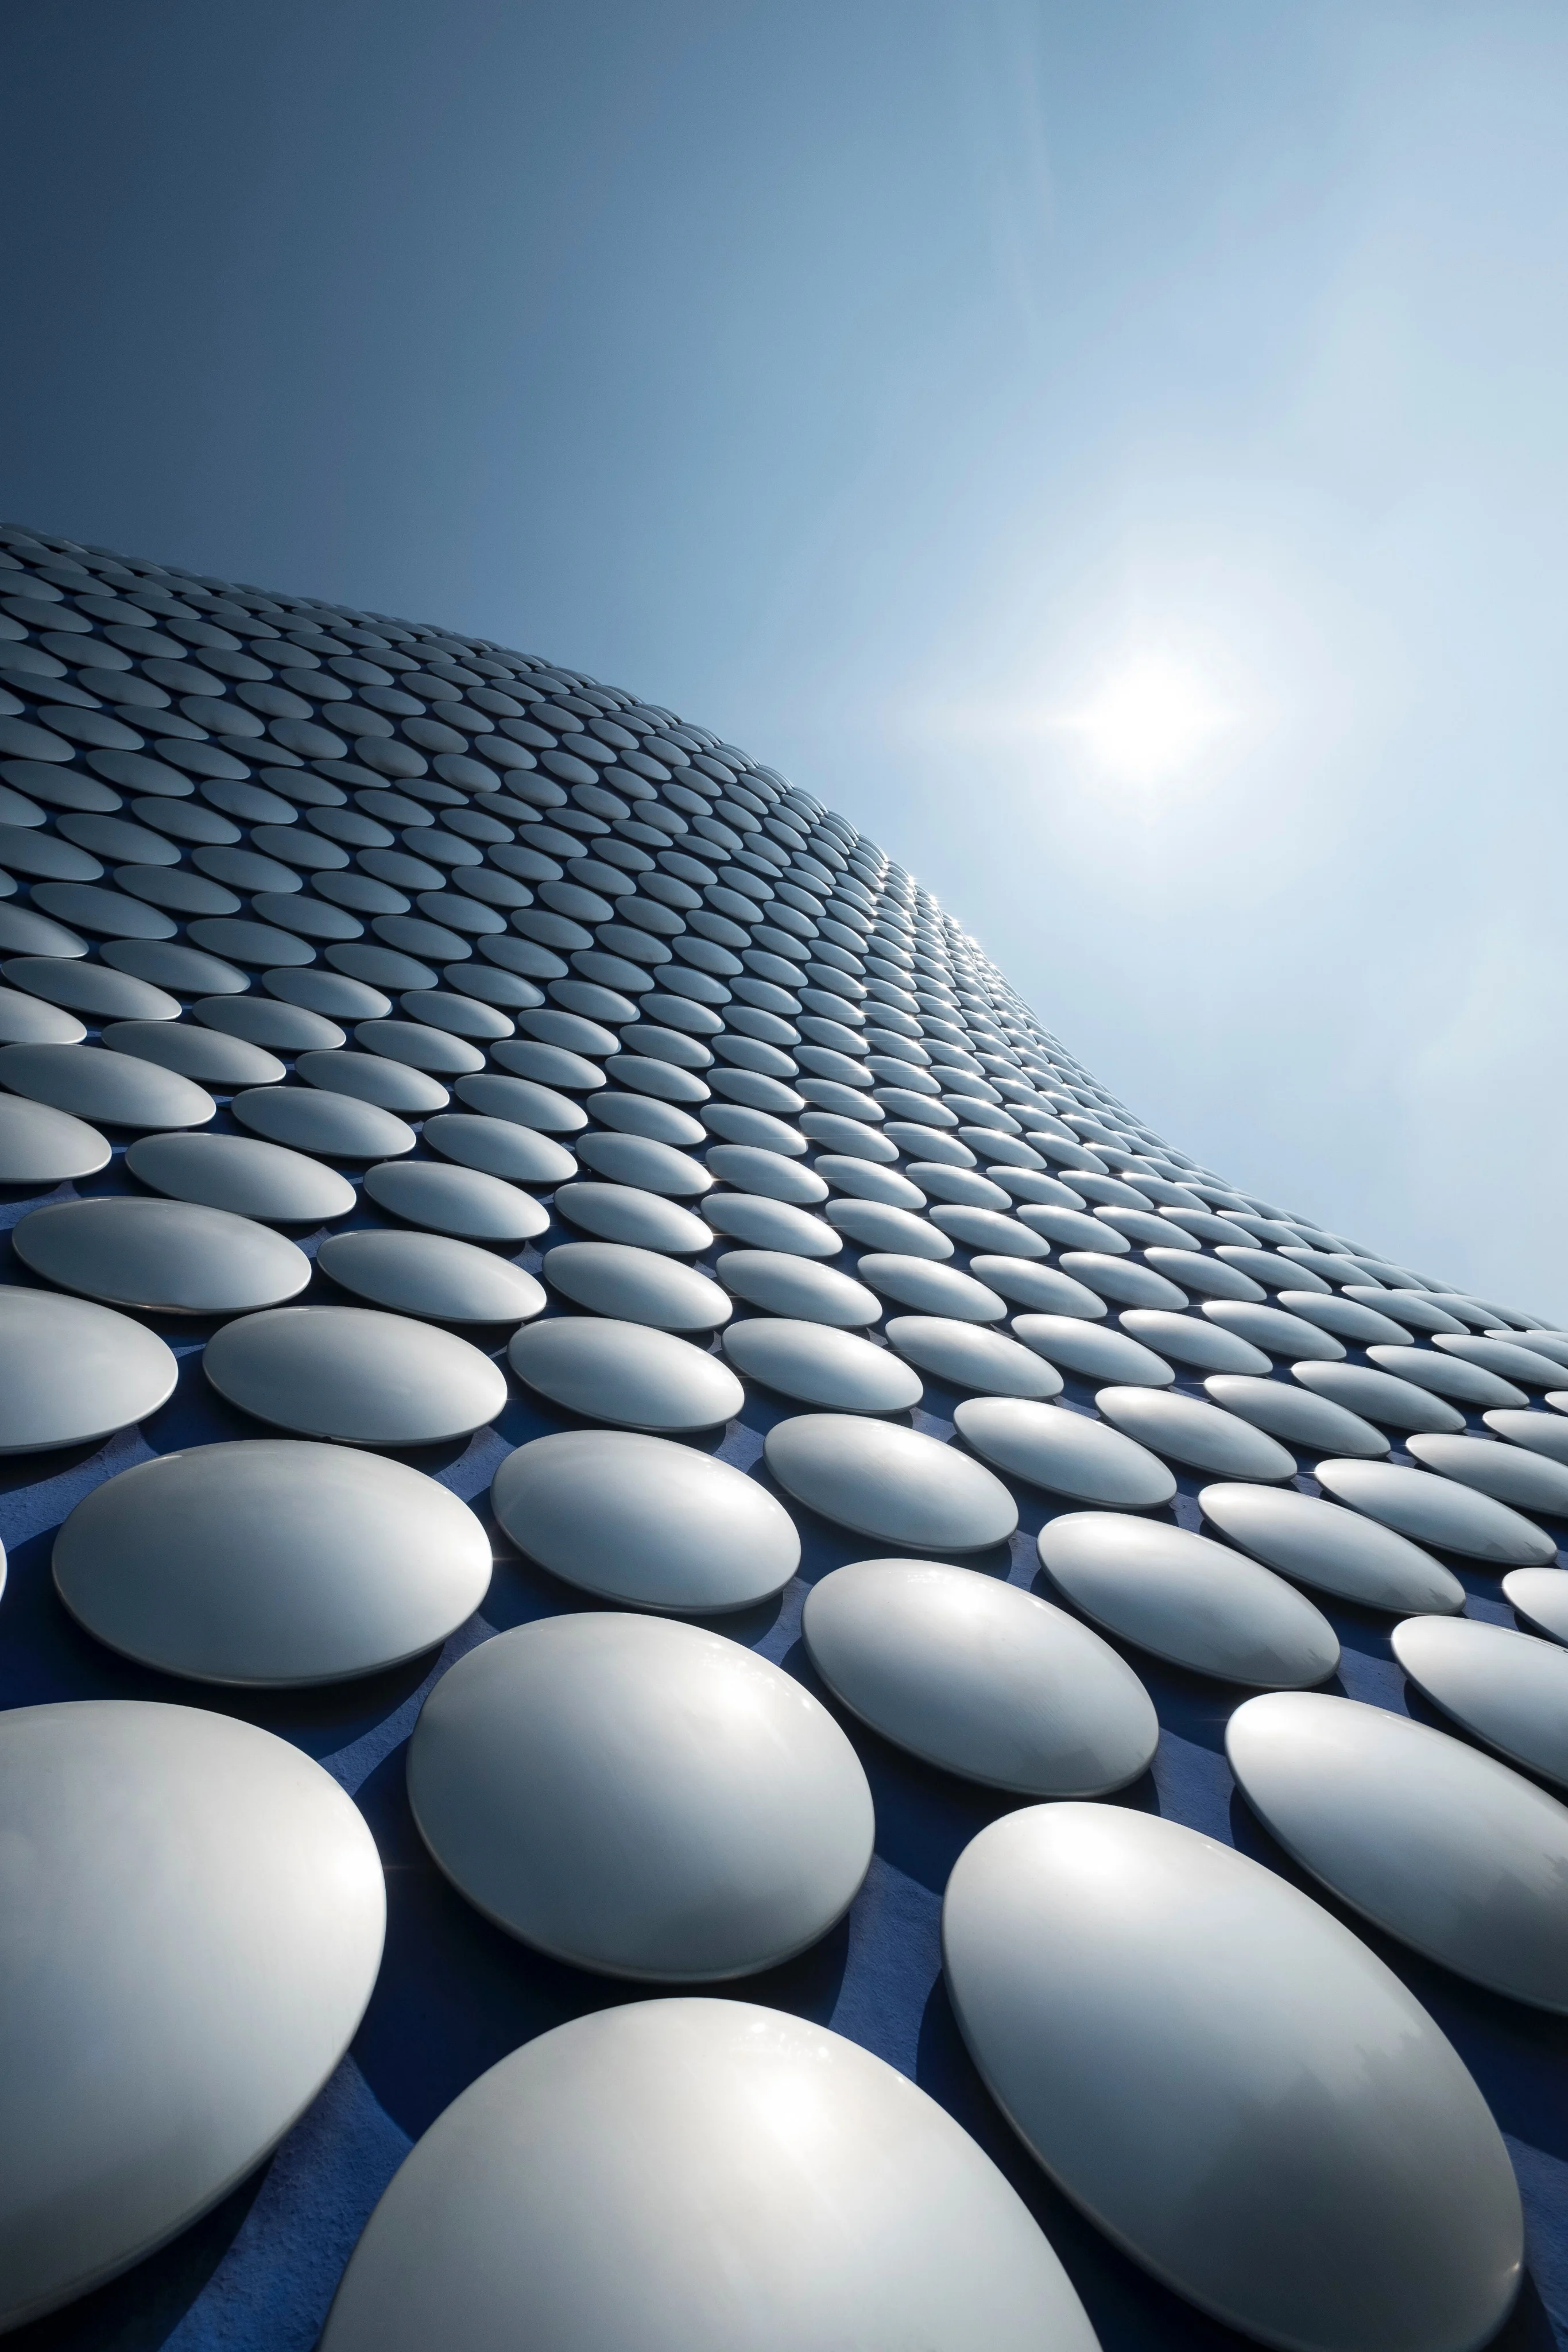 An image of the outside of selfridges in birmingham from below looking up. You can see the iconic silver circles with the blue background of the building and the sky on a sunny day